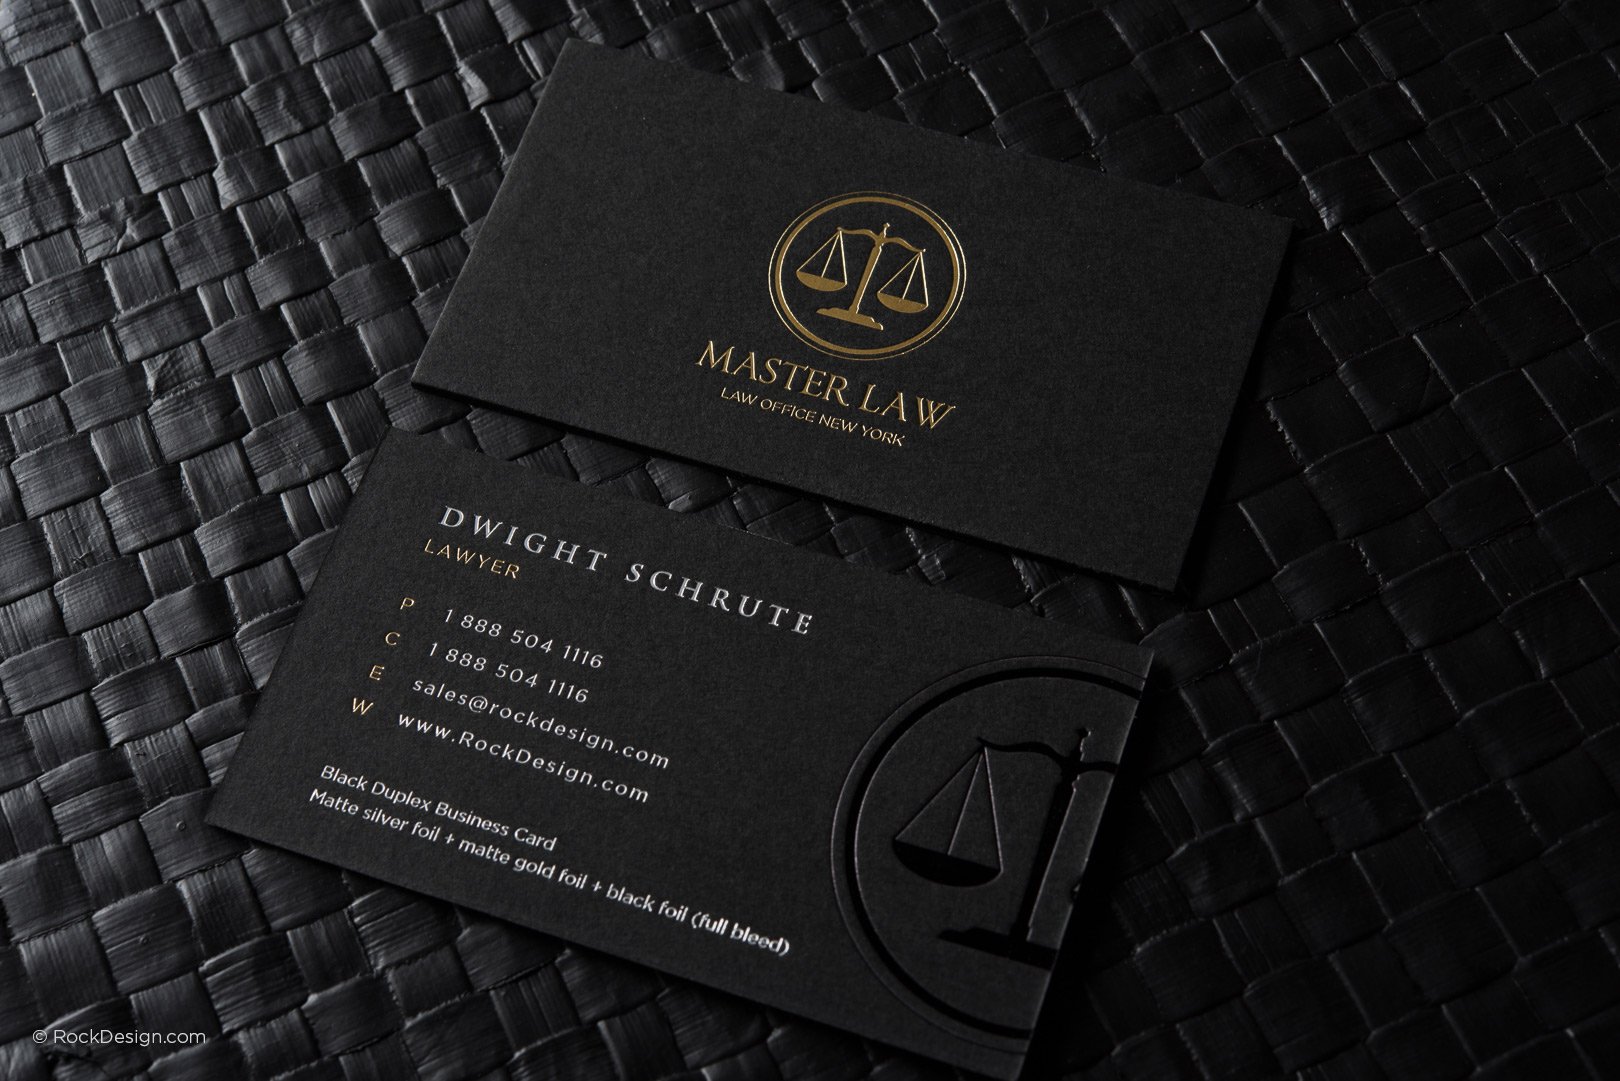 FREE Lawyer business card template  RockDesign.com Within Legal Business Cards Templates Free